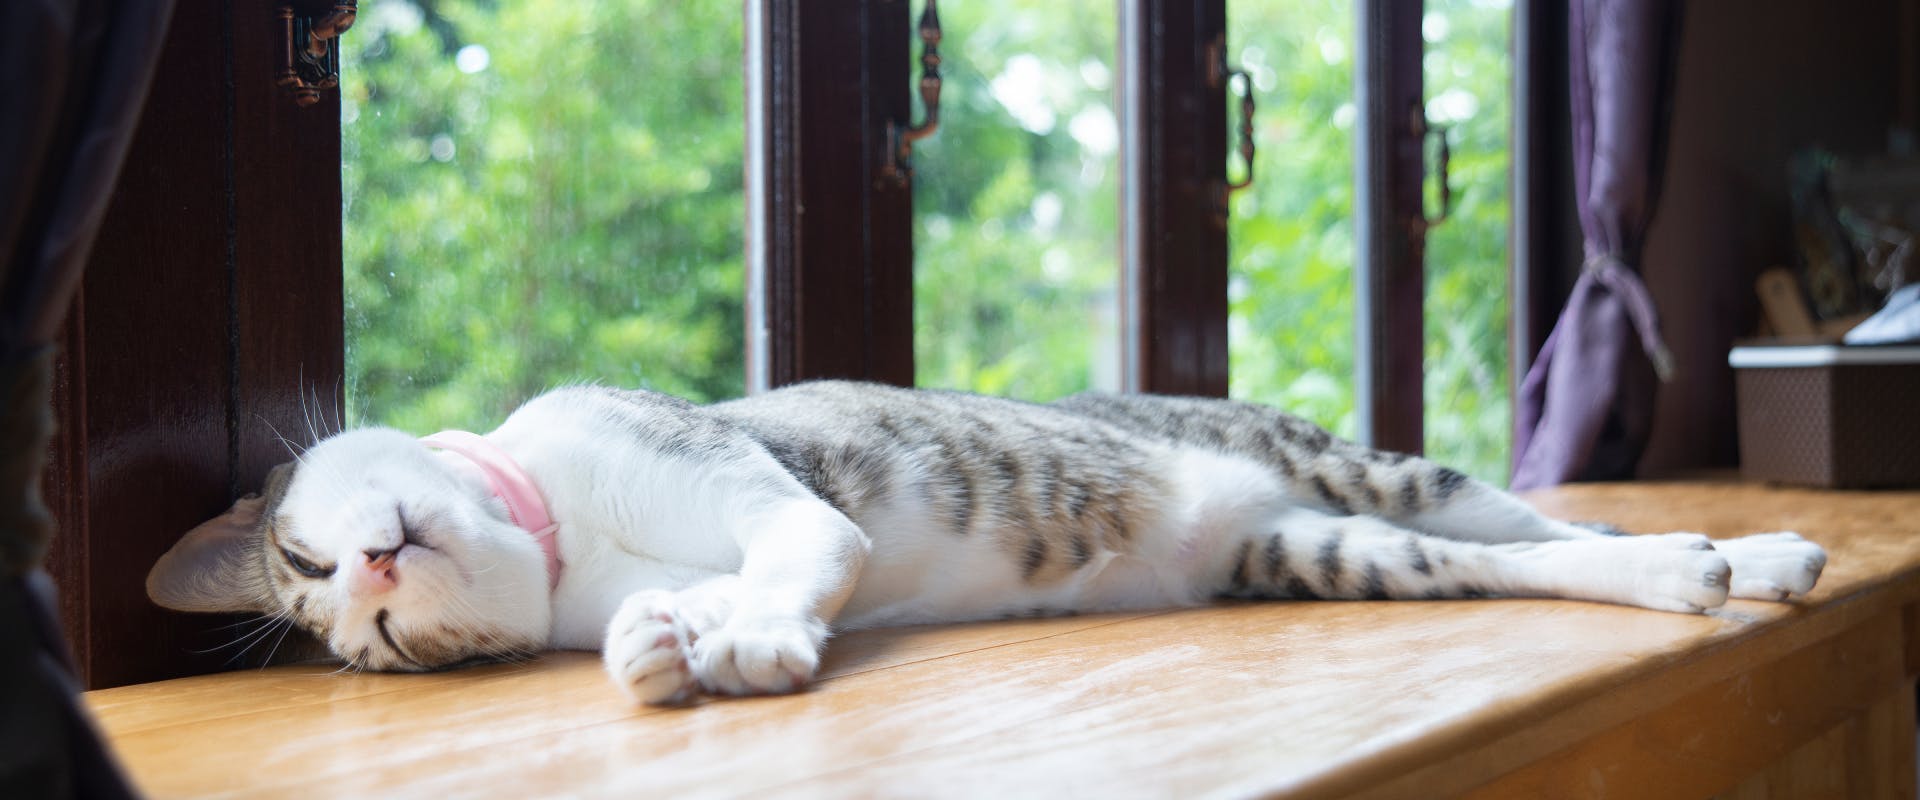 a white and gray tabby cat sleeping on its side next to a window on a wooden cabinet whilst wearing a pink collar